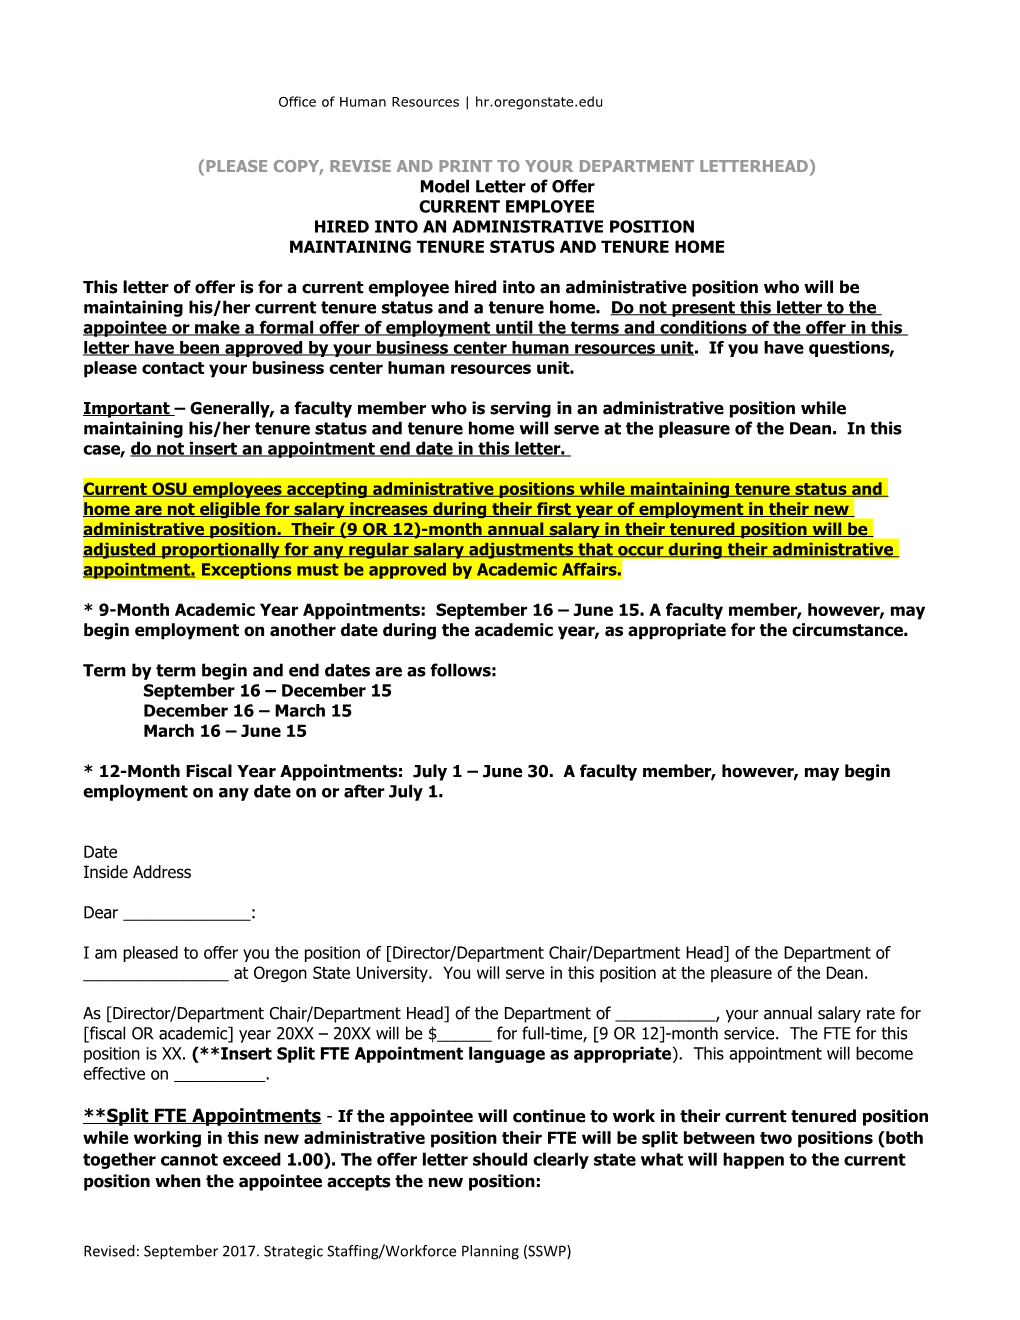 Sample Letter of Offer for Current Employee Hired Into Admin Position - Maintaining Tenure